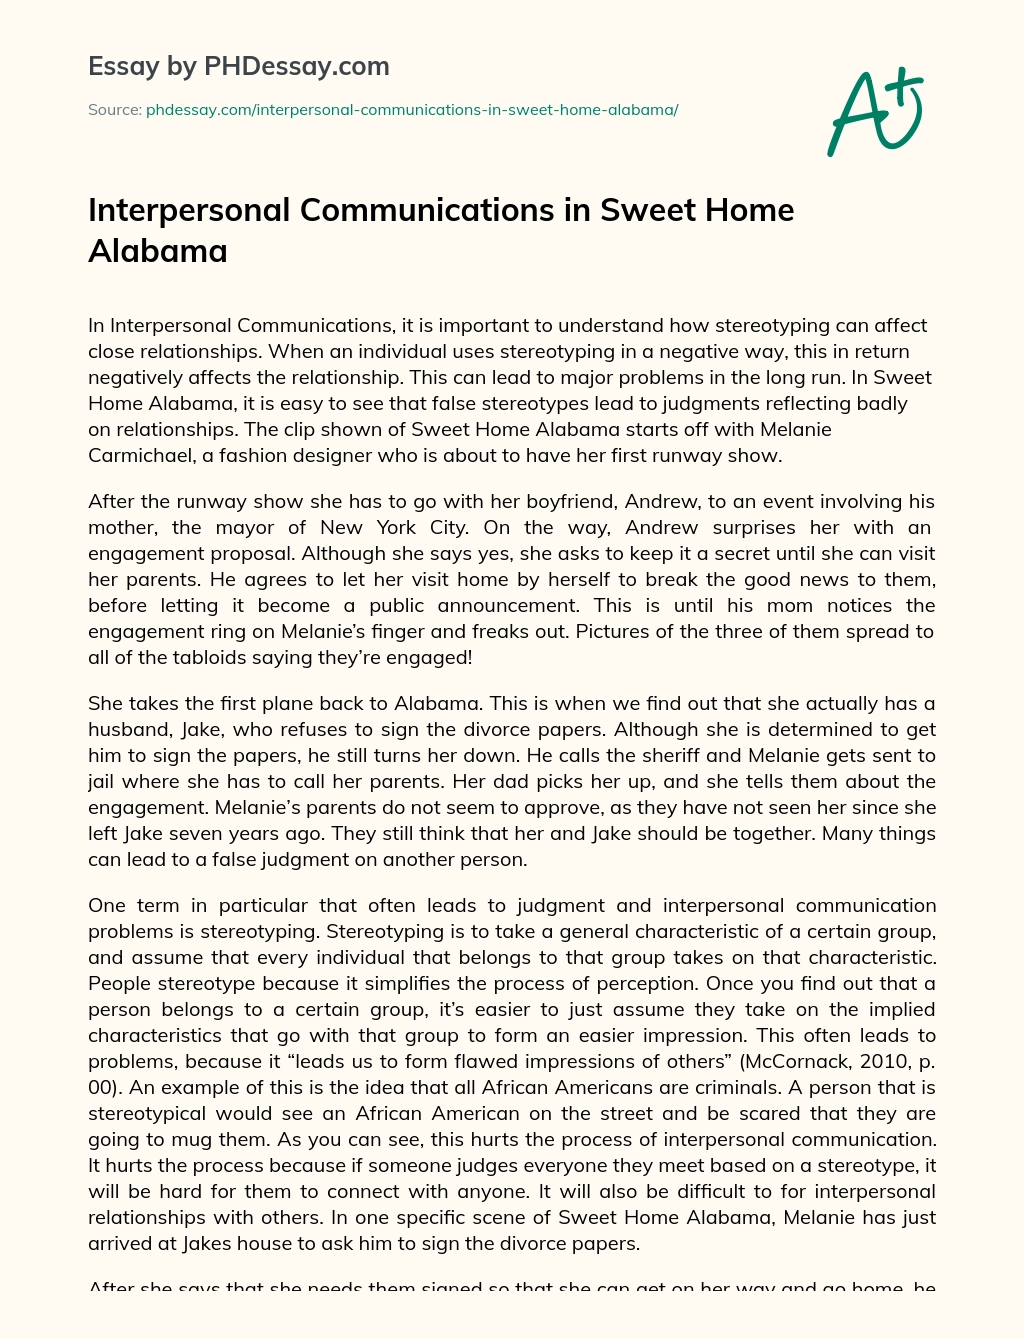 Interpersonal Communications in Sweet Home Alabama essay